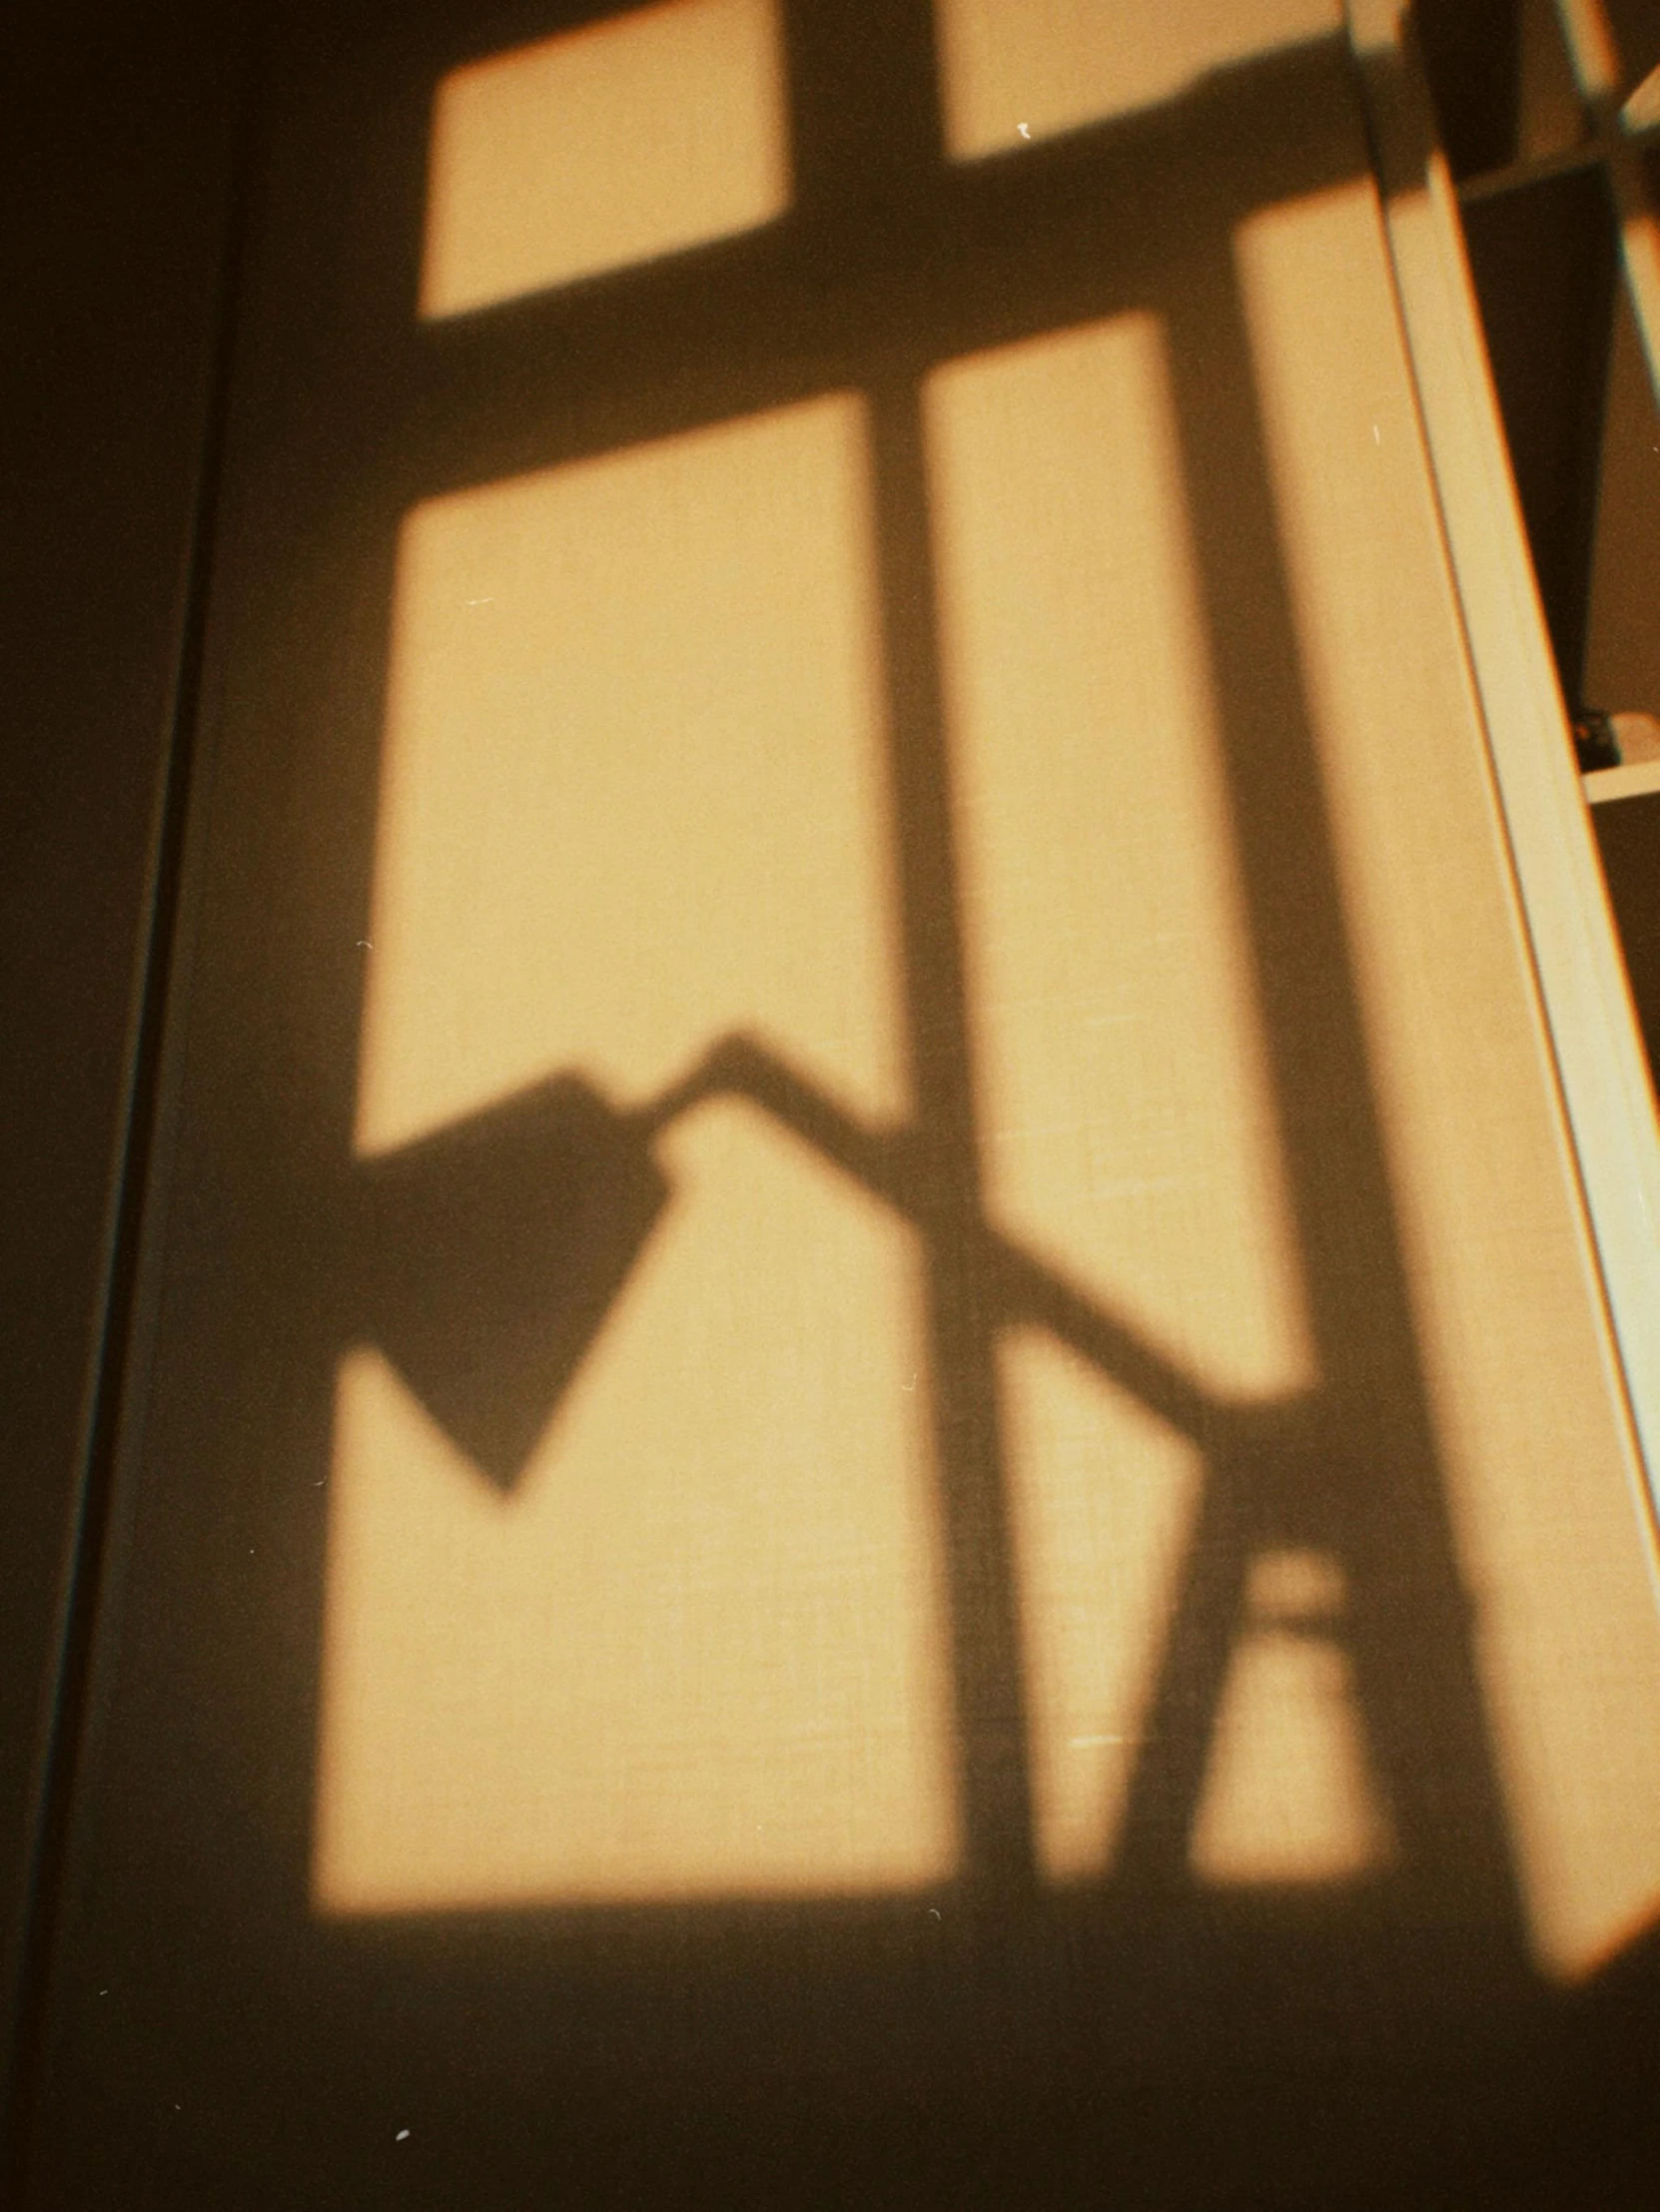 there is an image of shadow of a lamp